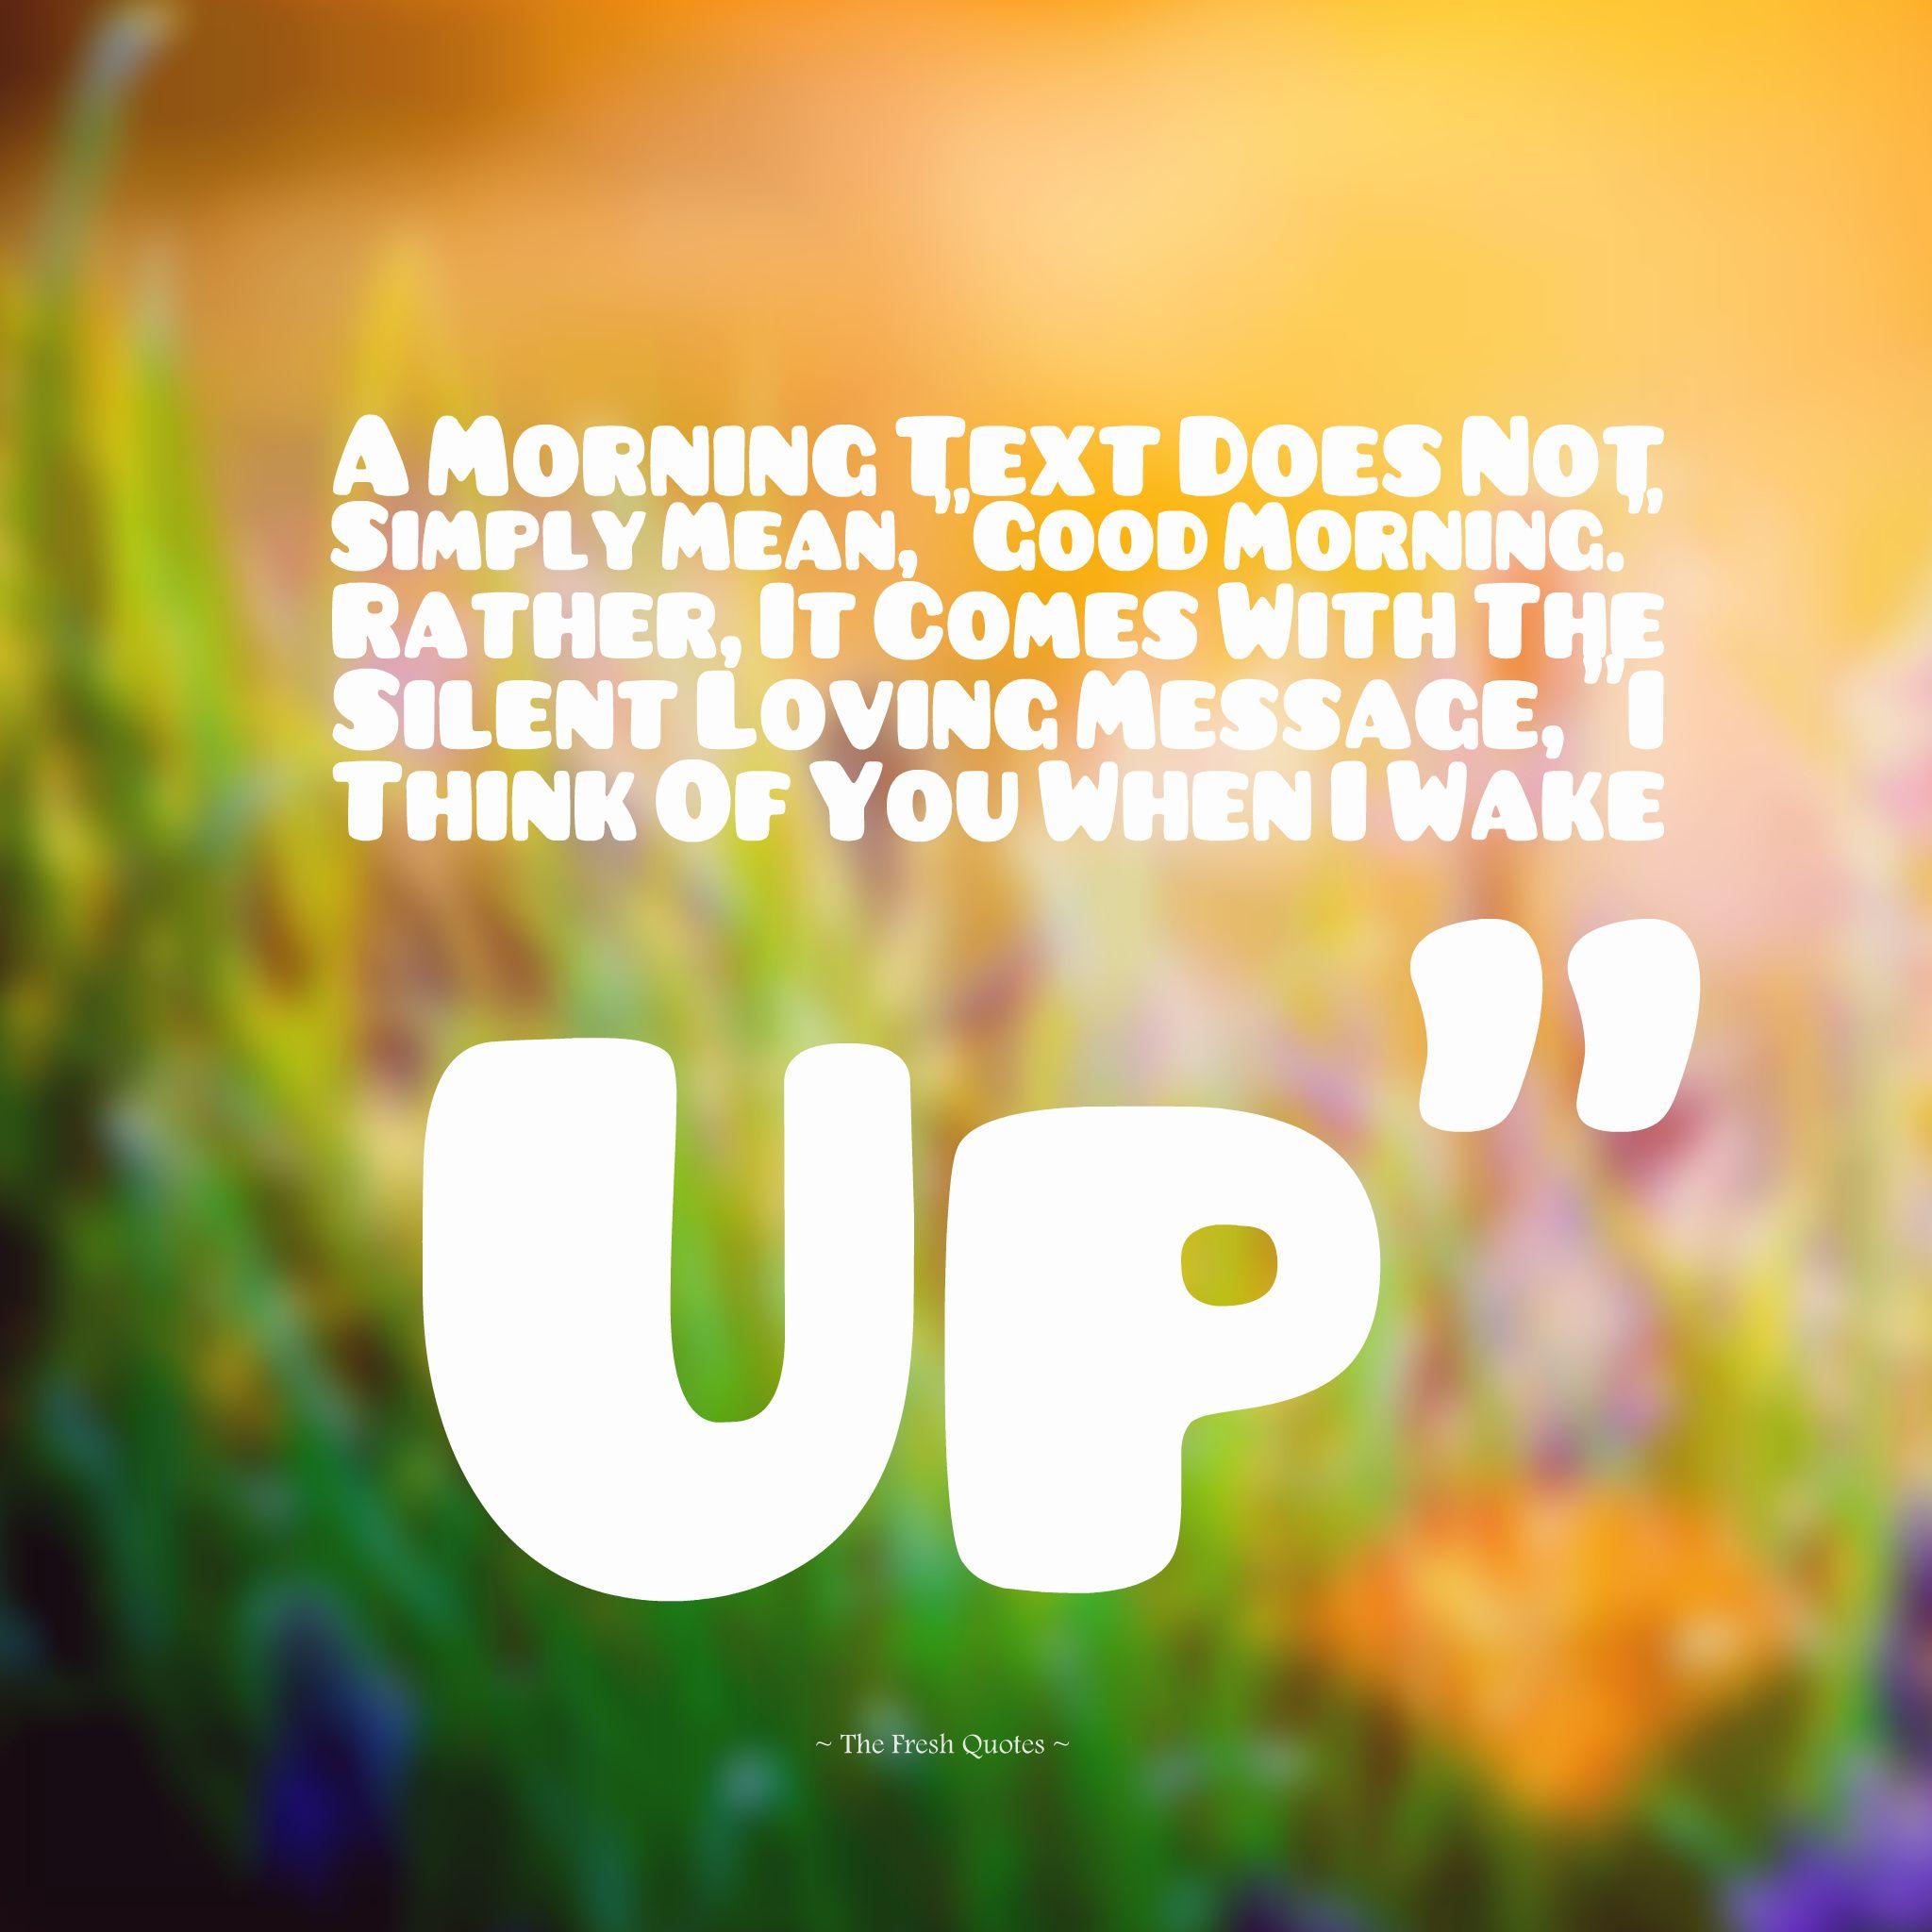 Wallpaper A Morning Text Does Not Simply Mean Good Rather It With